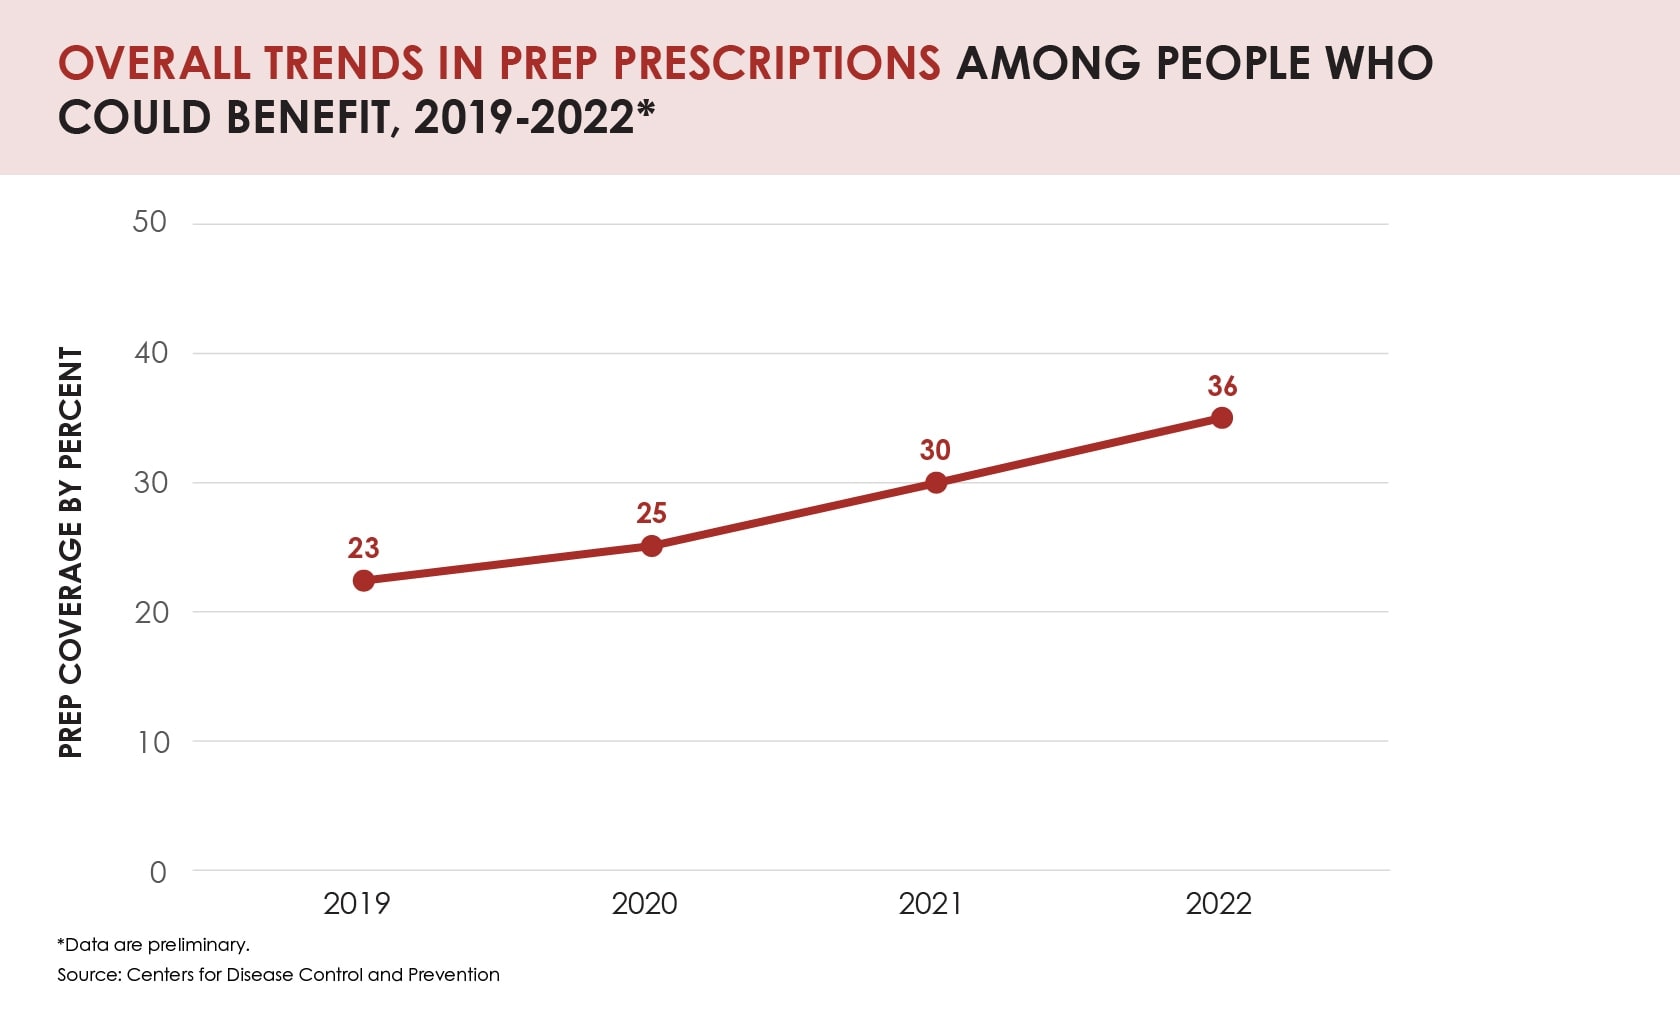 Chart shows in 2019 PrEP coverage was 23 percent, 2020 was 25 percent, 2021 was 30 percent, in 2022 it was 36 percent.